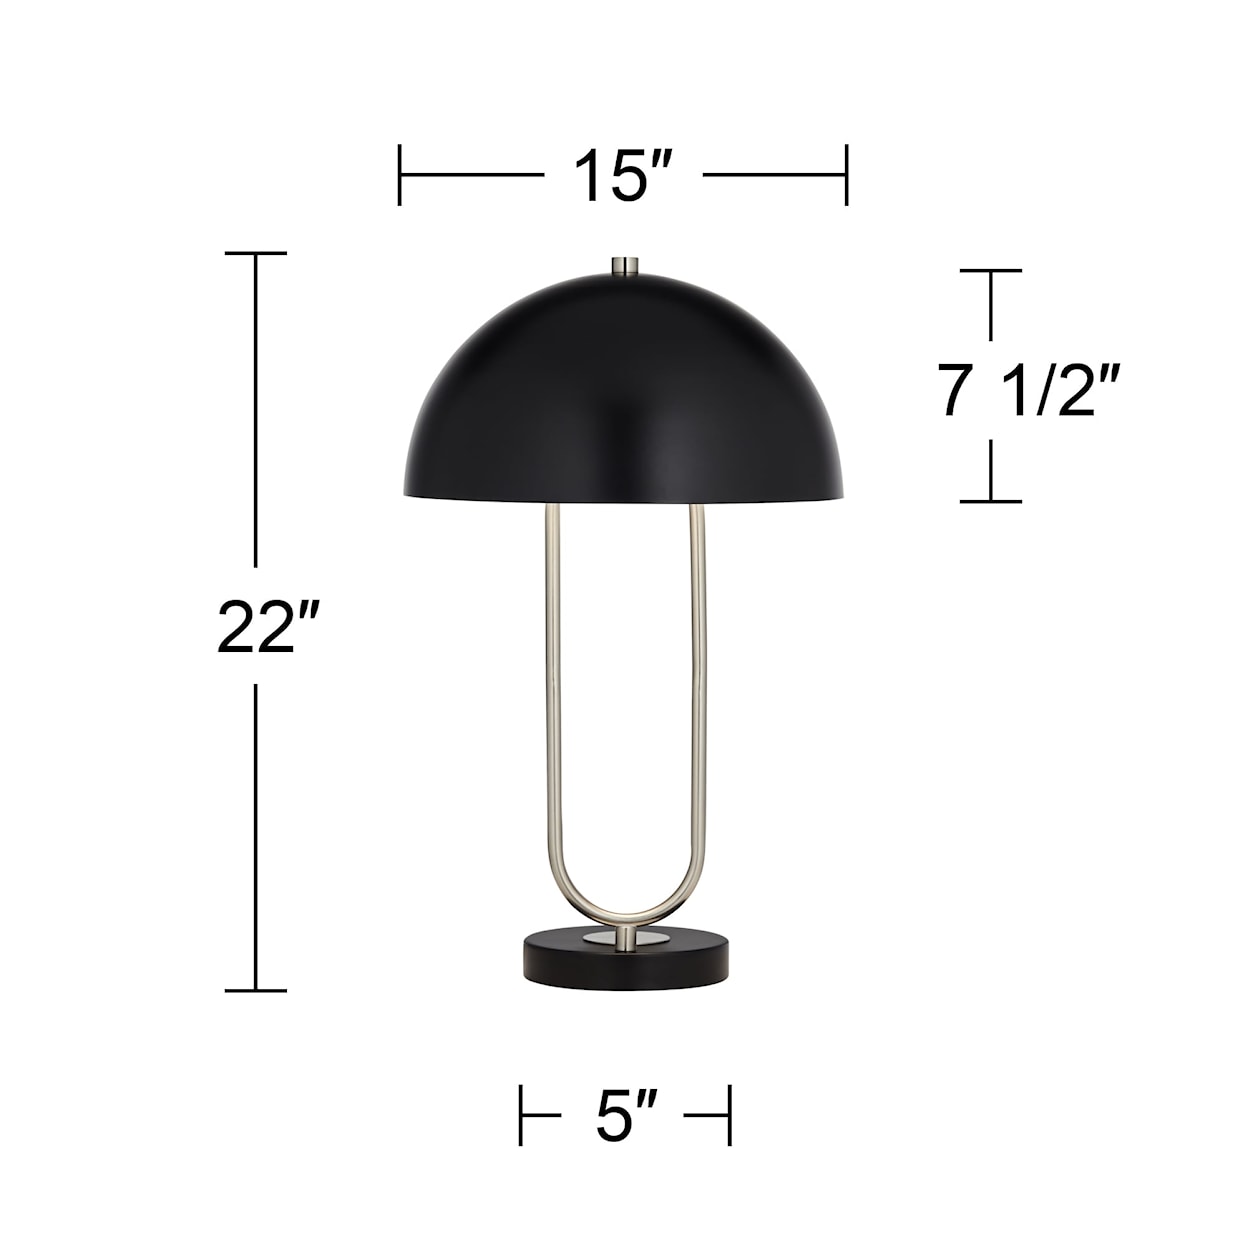 Pacific Coast Lighting Pacific Coast Lighting TL-22"ht metal with dome shade